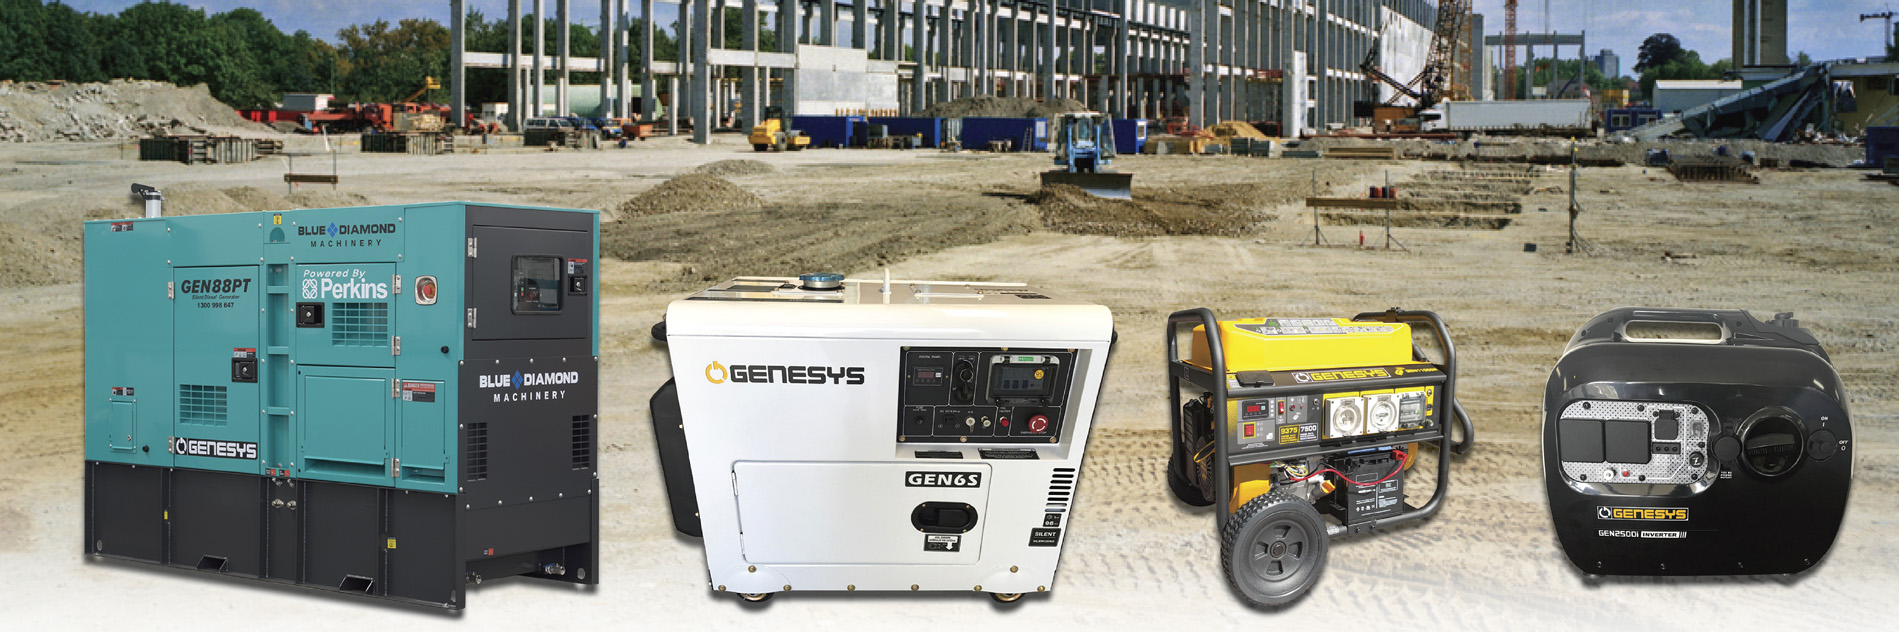 various generator types and sizes in construction site